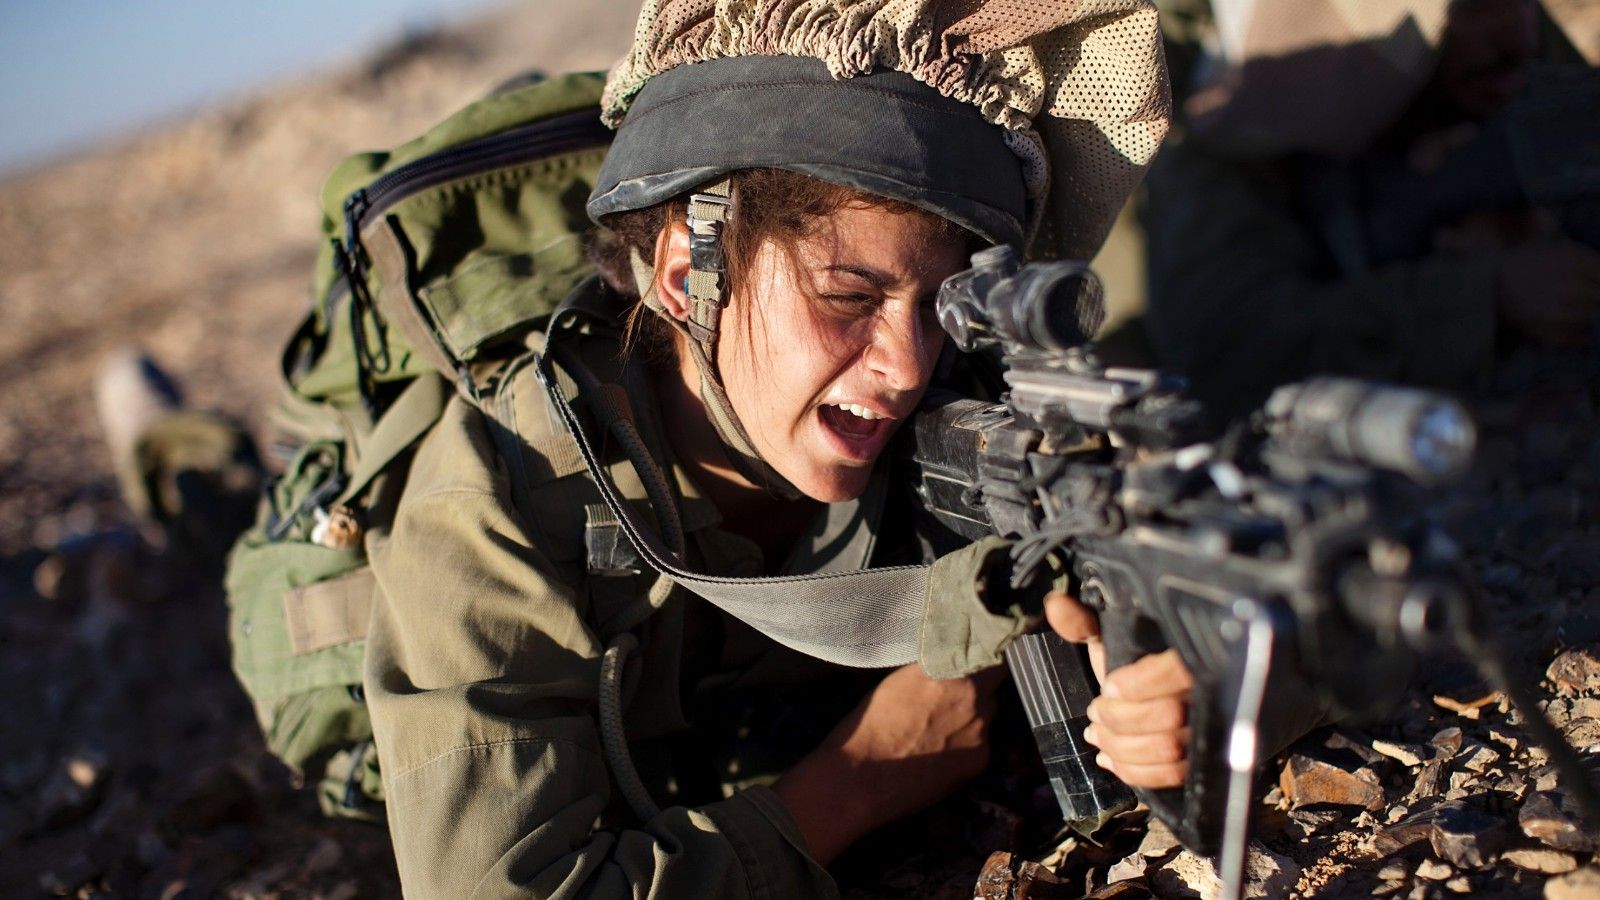 Women in combat: U.S. joins more than a dozen nations